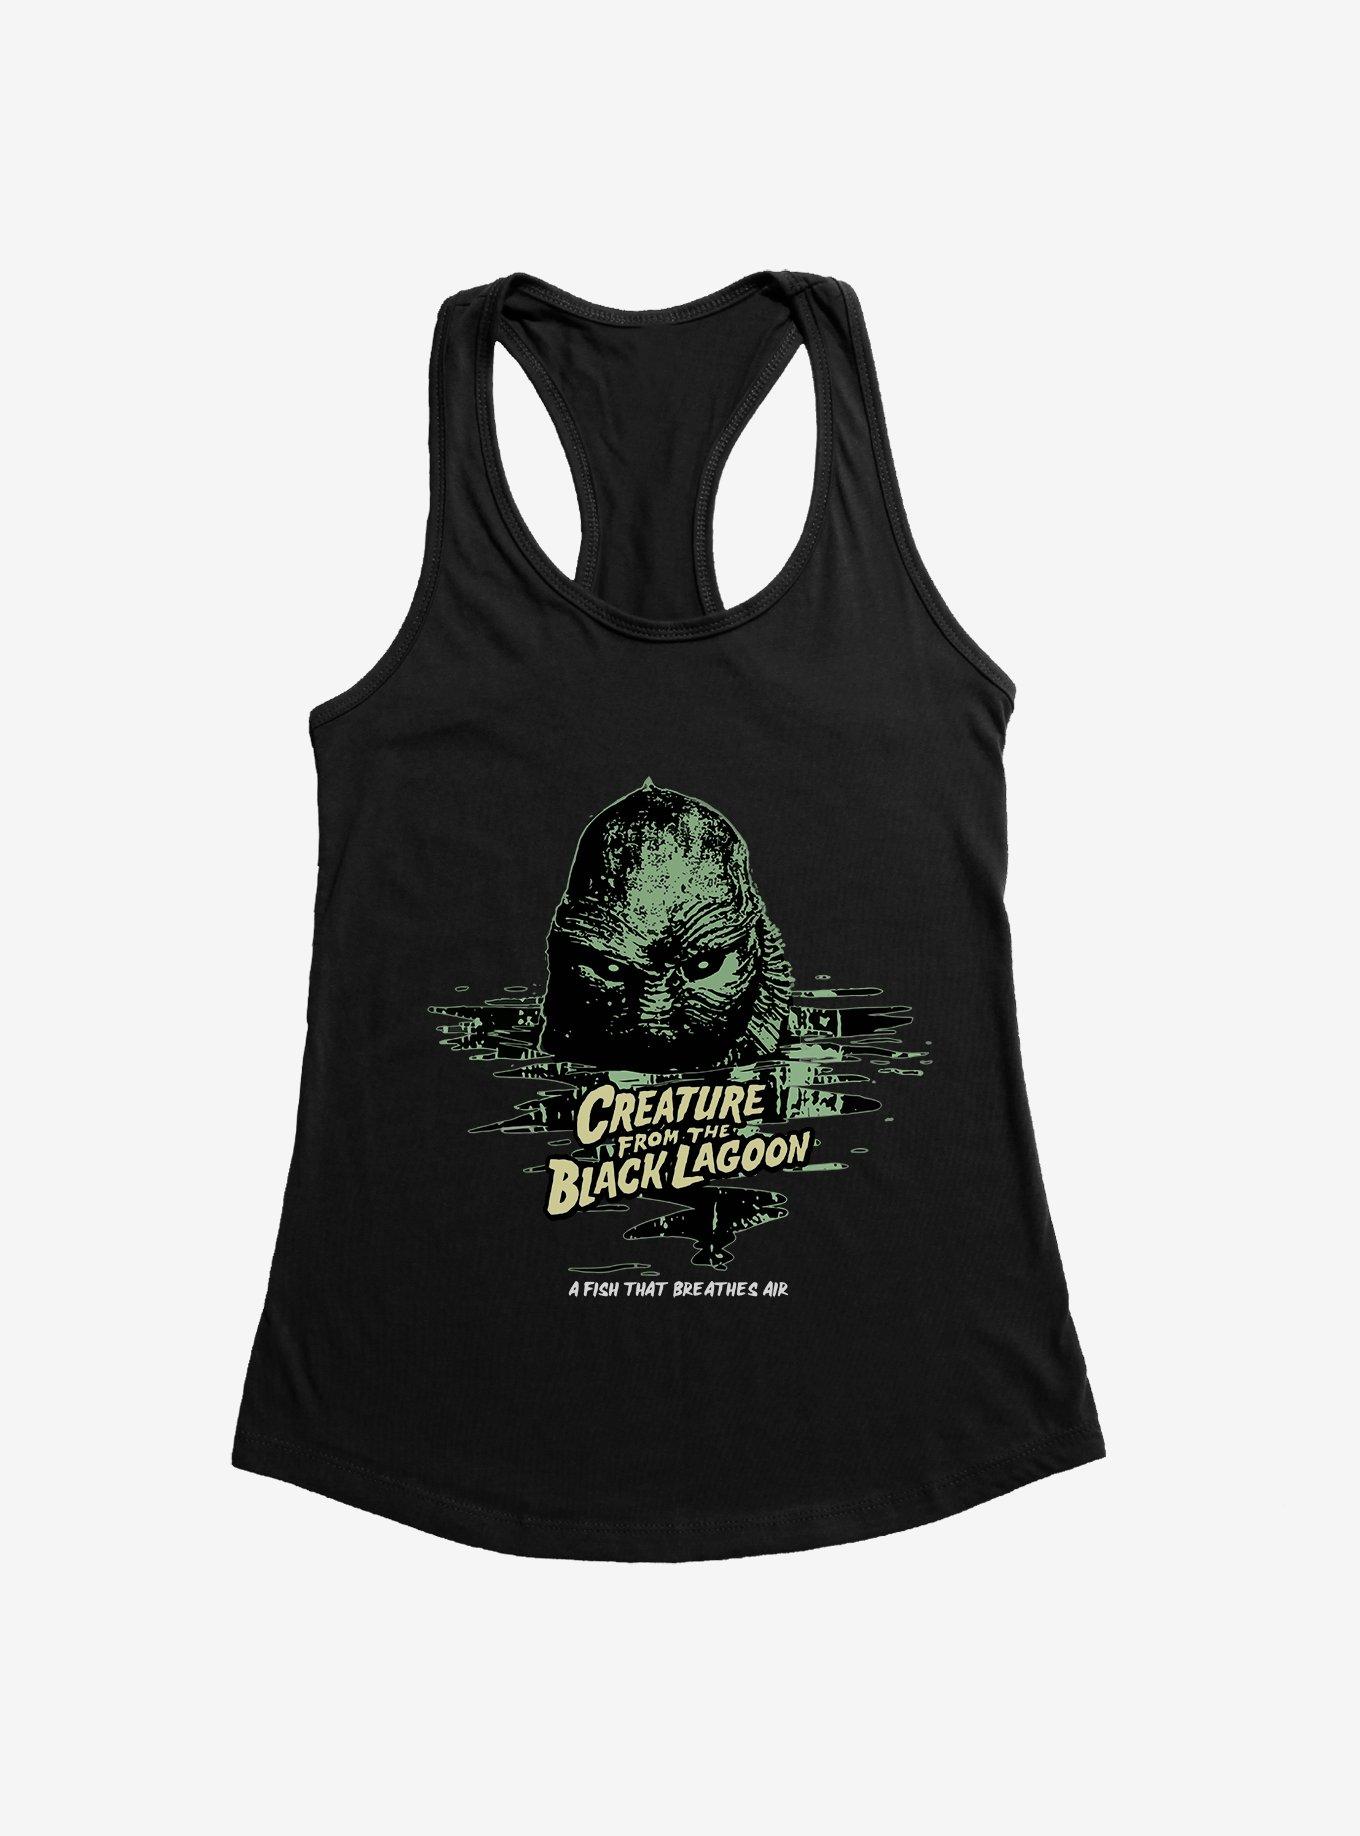 Creature From The Black Lagoon Fish That Breathes Air Womens Tank Top, BLACK, hi-res